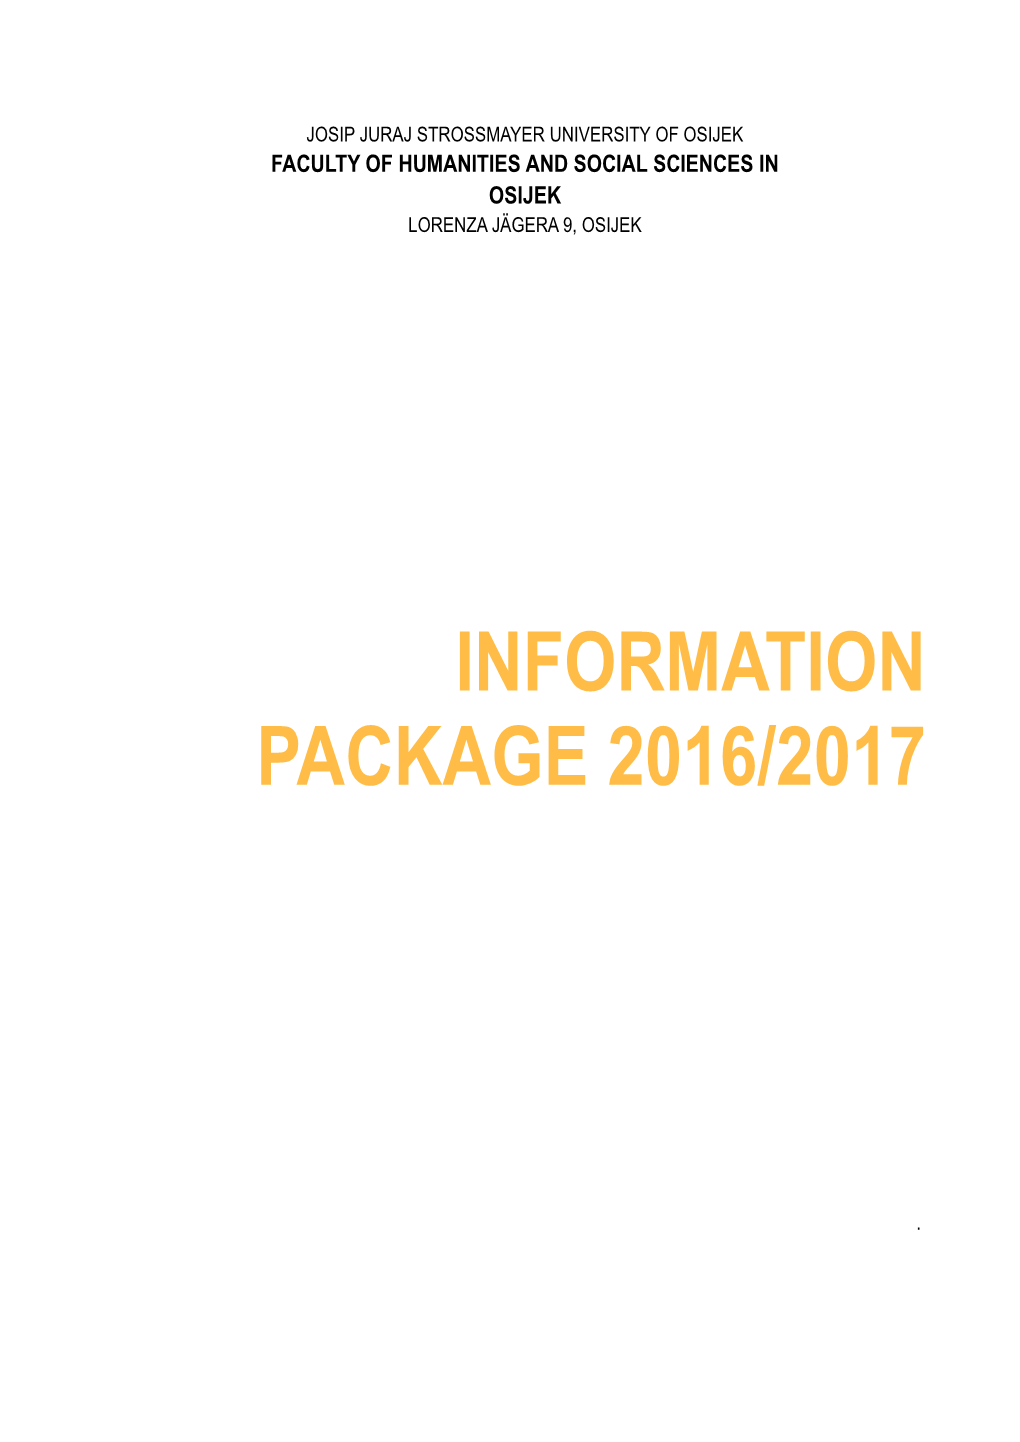 Information Package 2016/2017